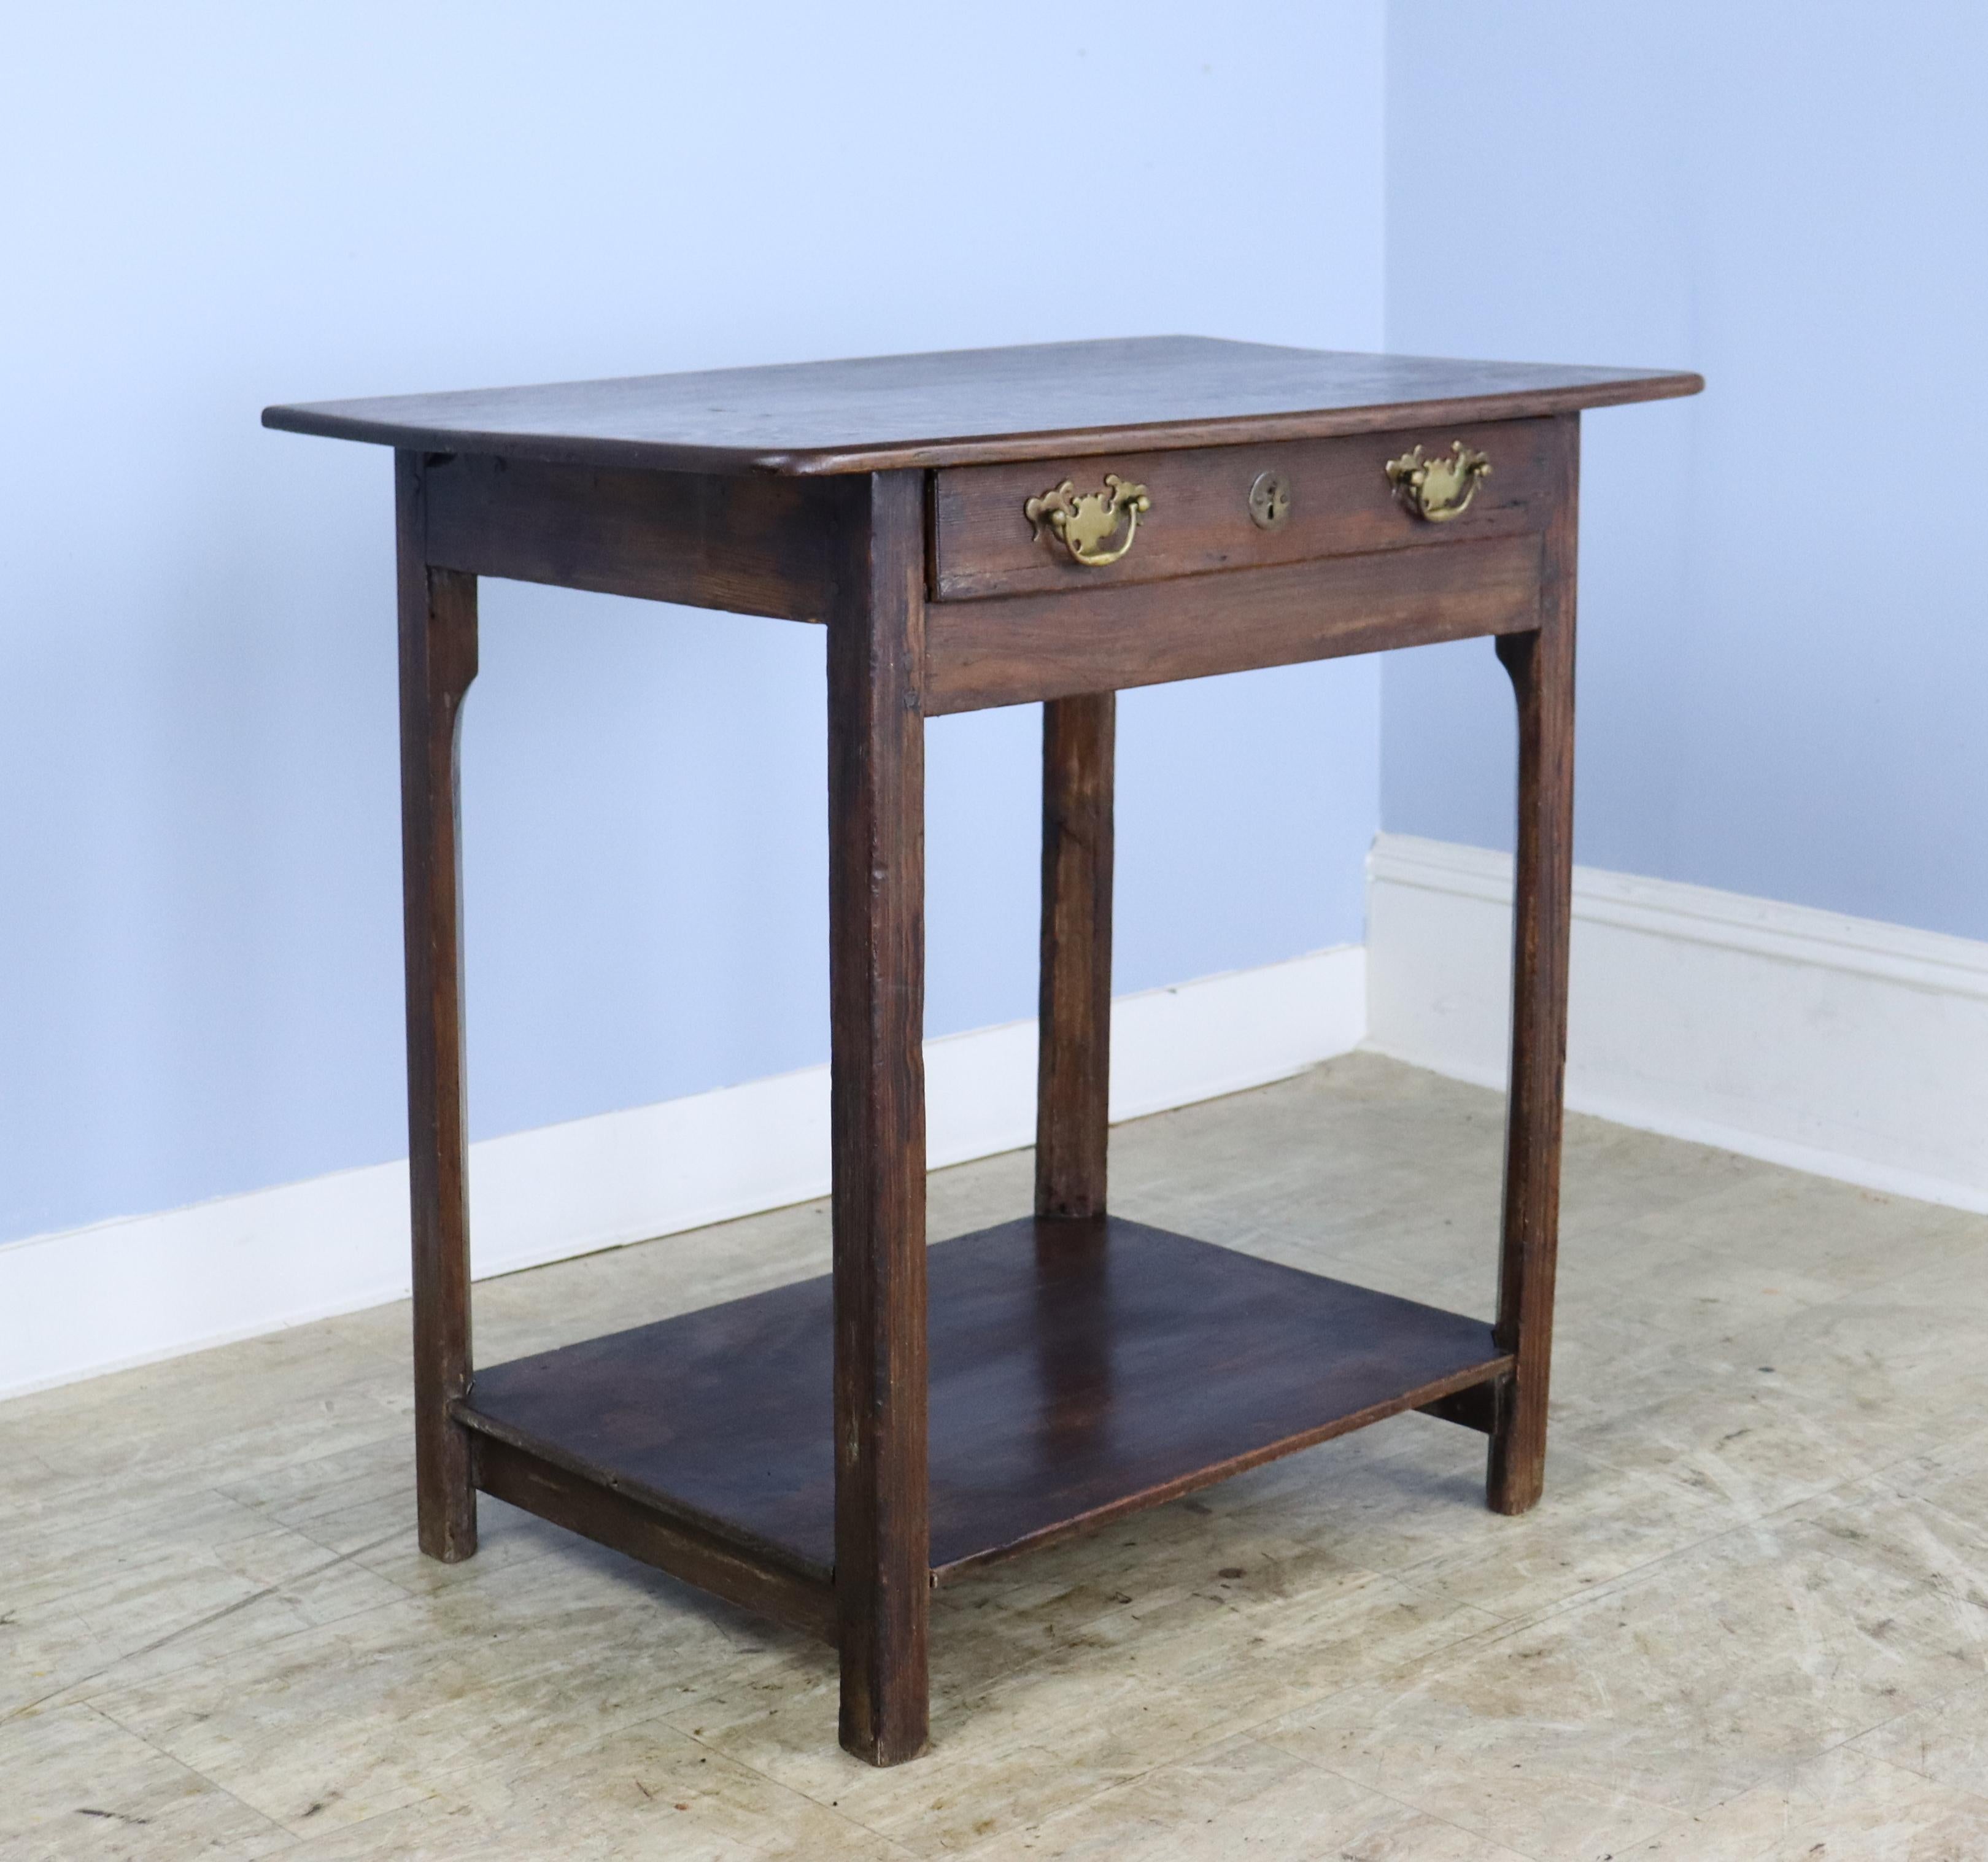 A charming, very early pine side table with a polished oak top.  Single shallow drawer with original brass ecutcheons and a low potboard complete the look.